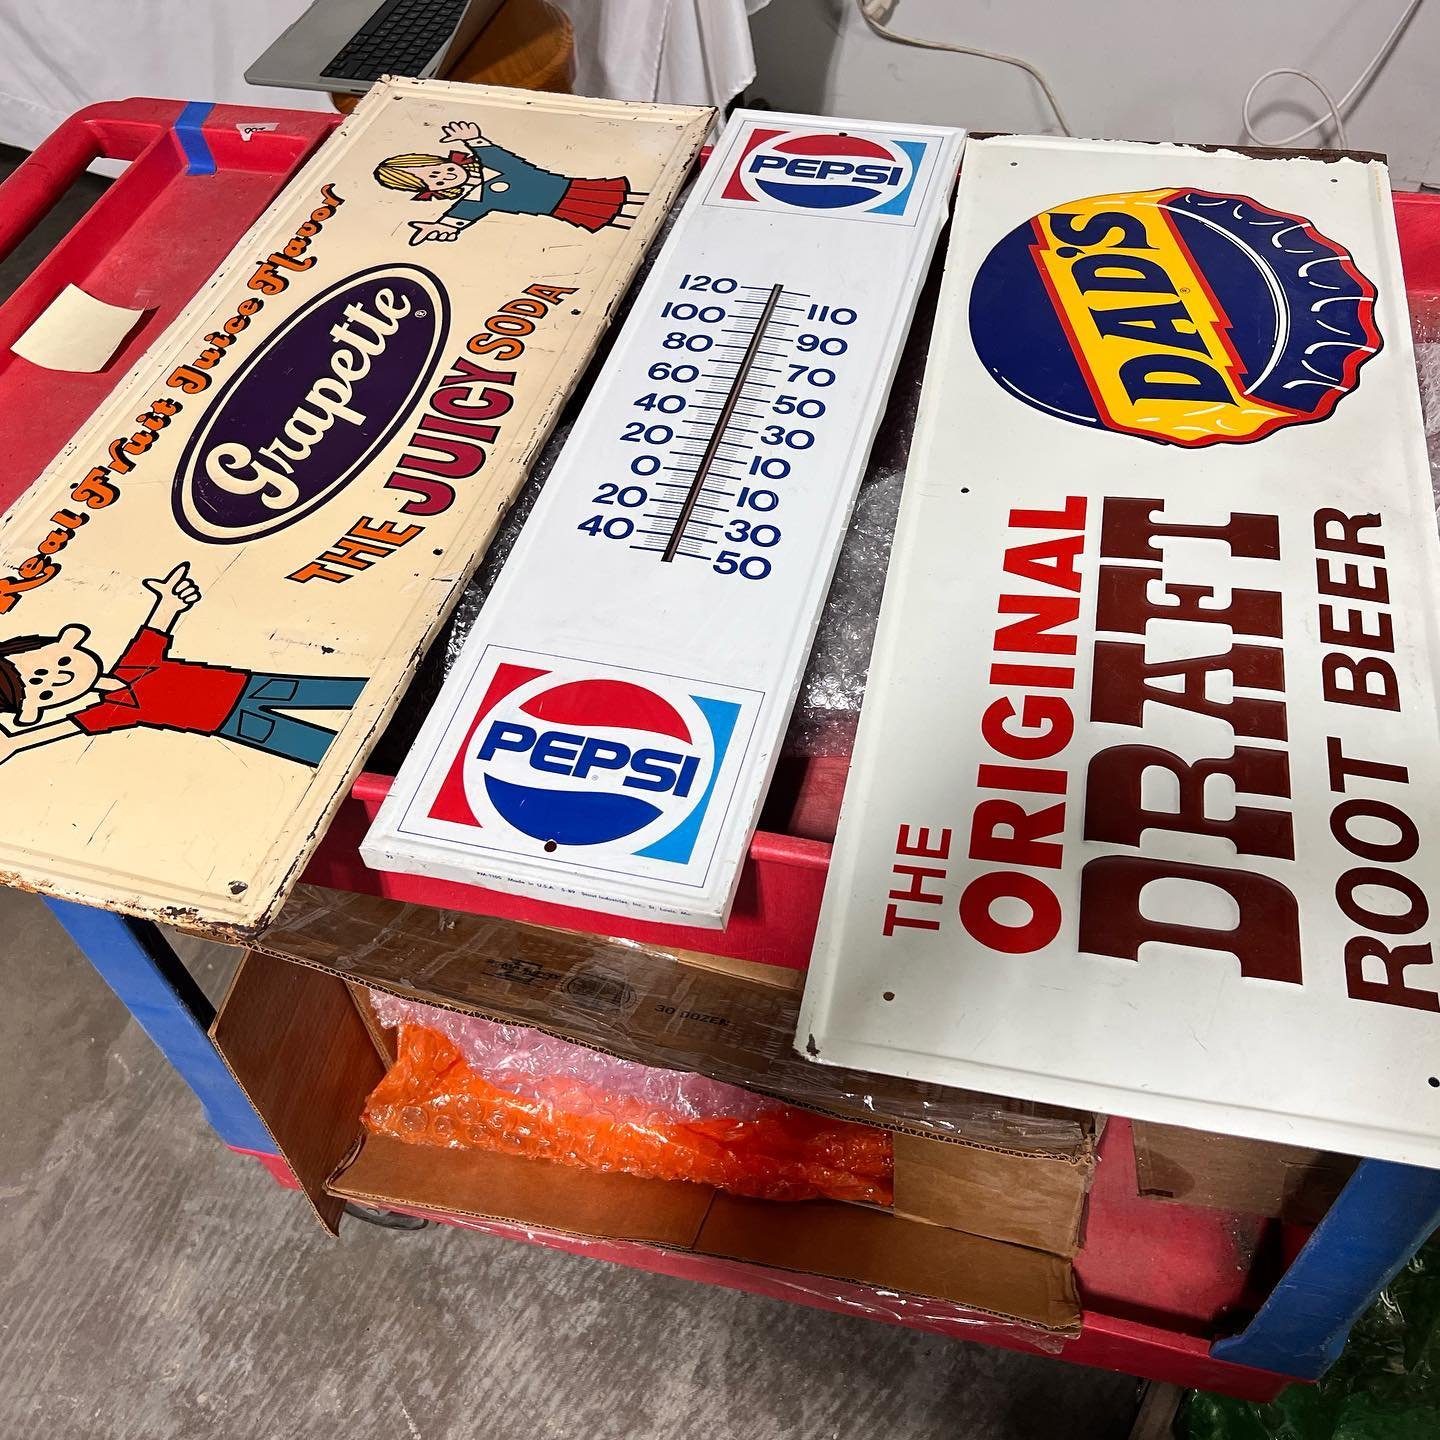 MORE great pieces being added to our current April Auction 🤩 - link in bio to register! 
.
#vintageadvertisingsigns #mancave #gameroomdecor #onlineauctions #jaybirdauctions